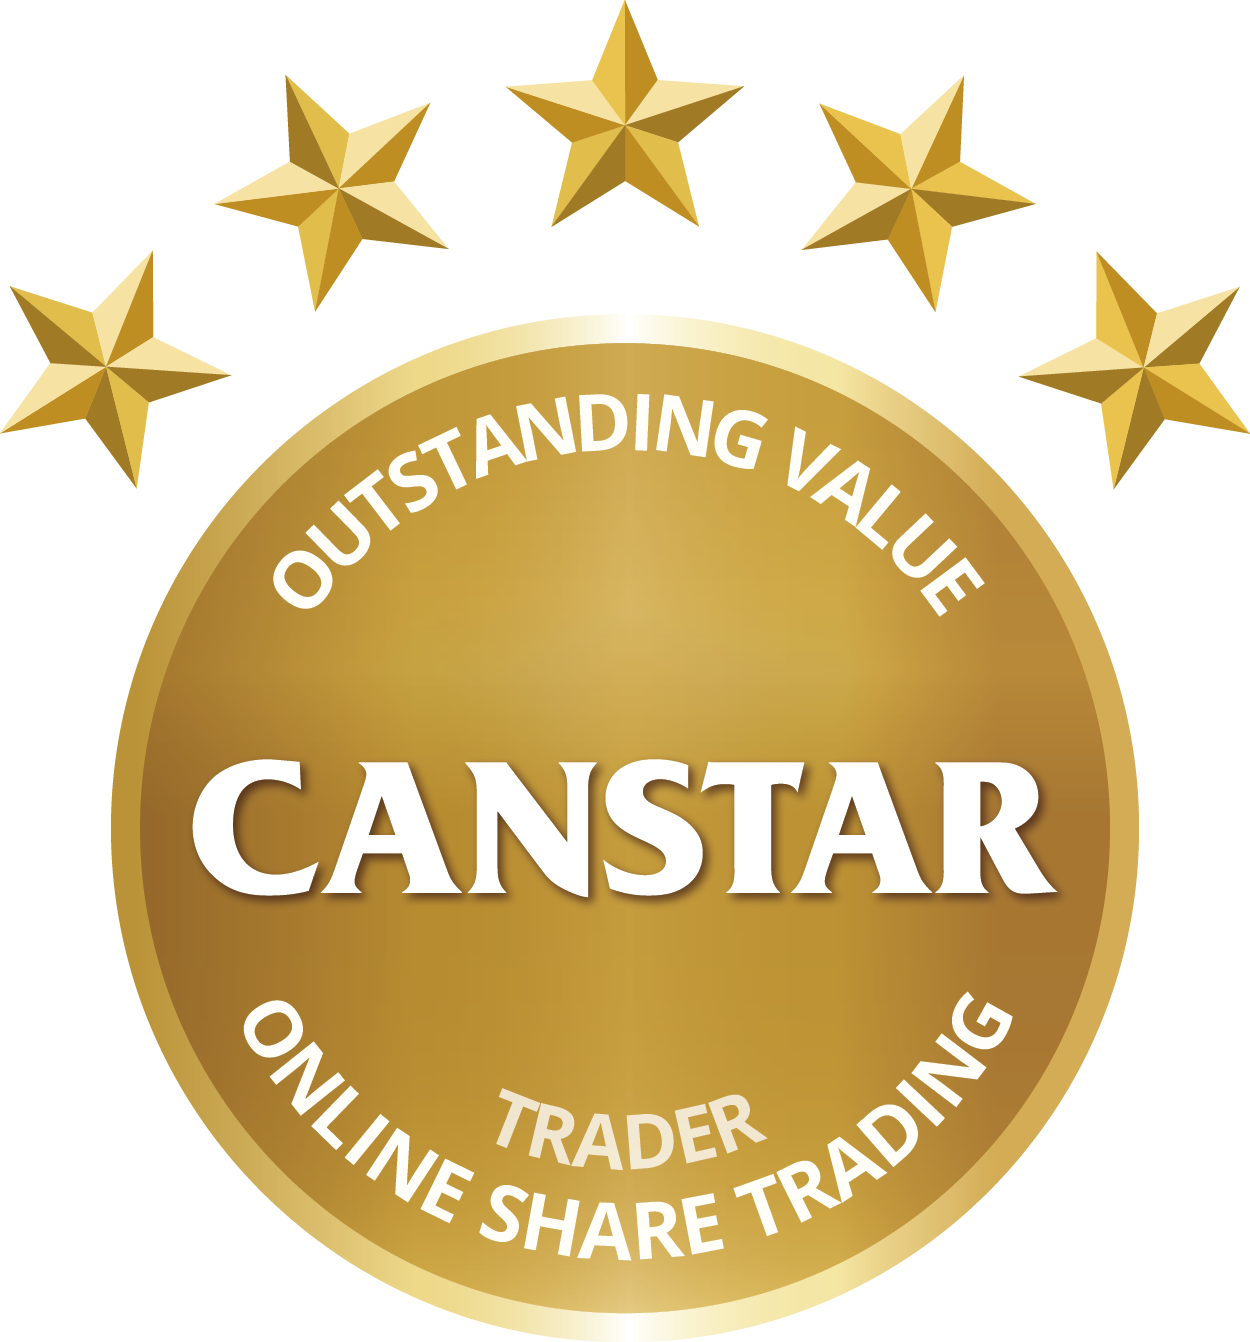 Canstar Outstanding Value for Traders